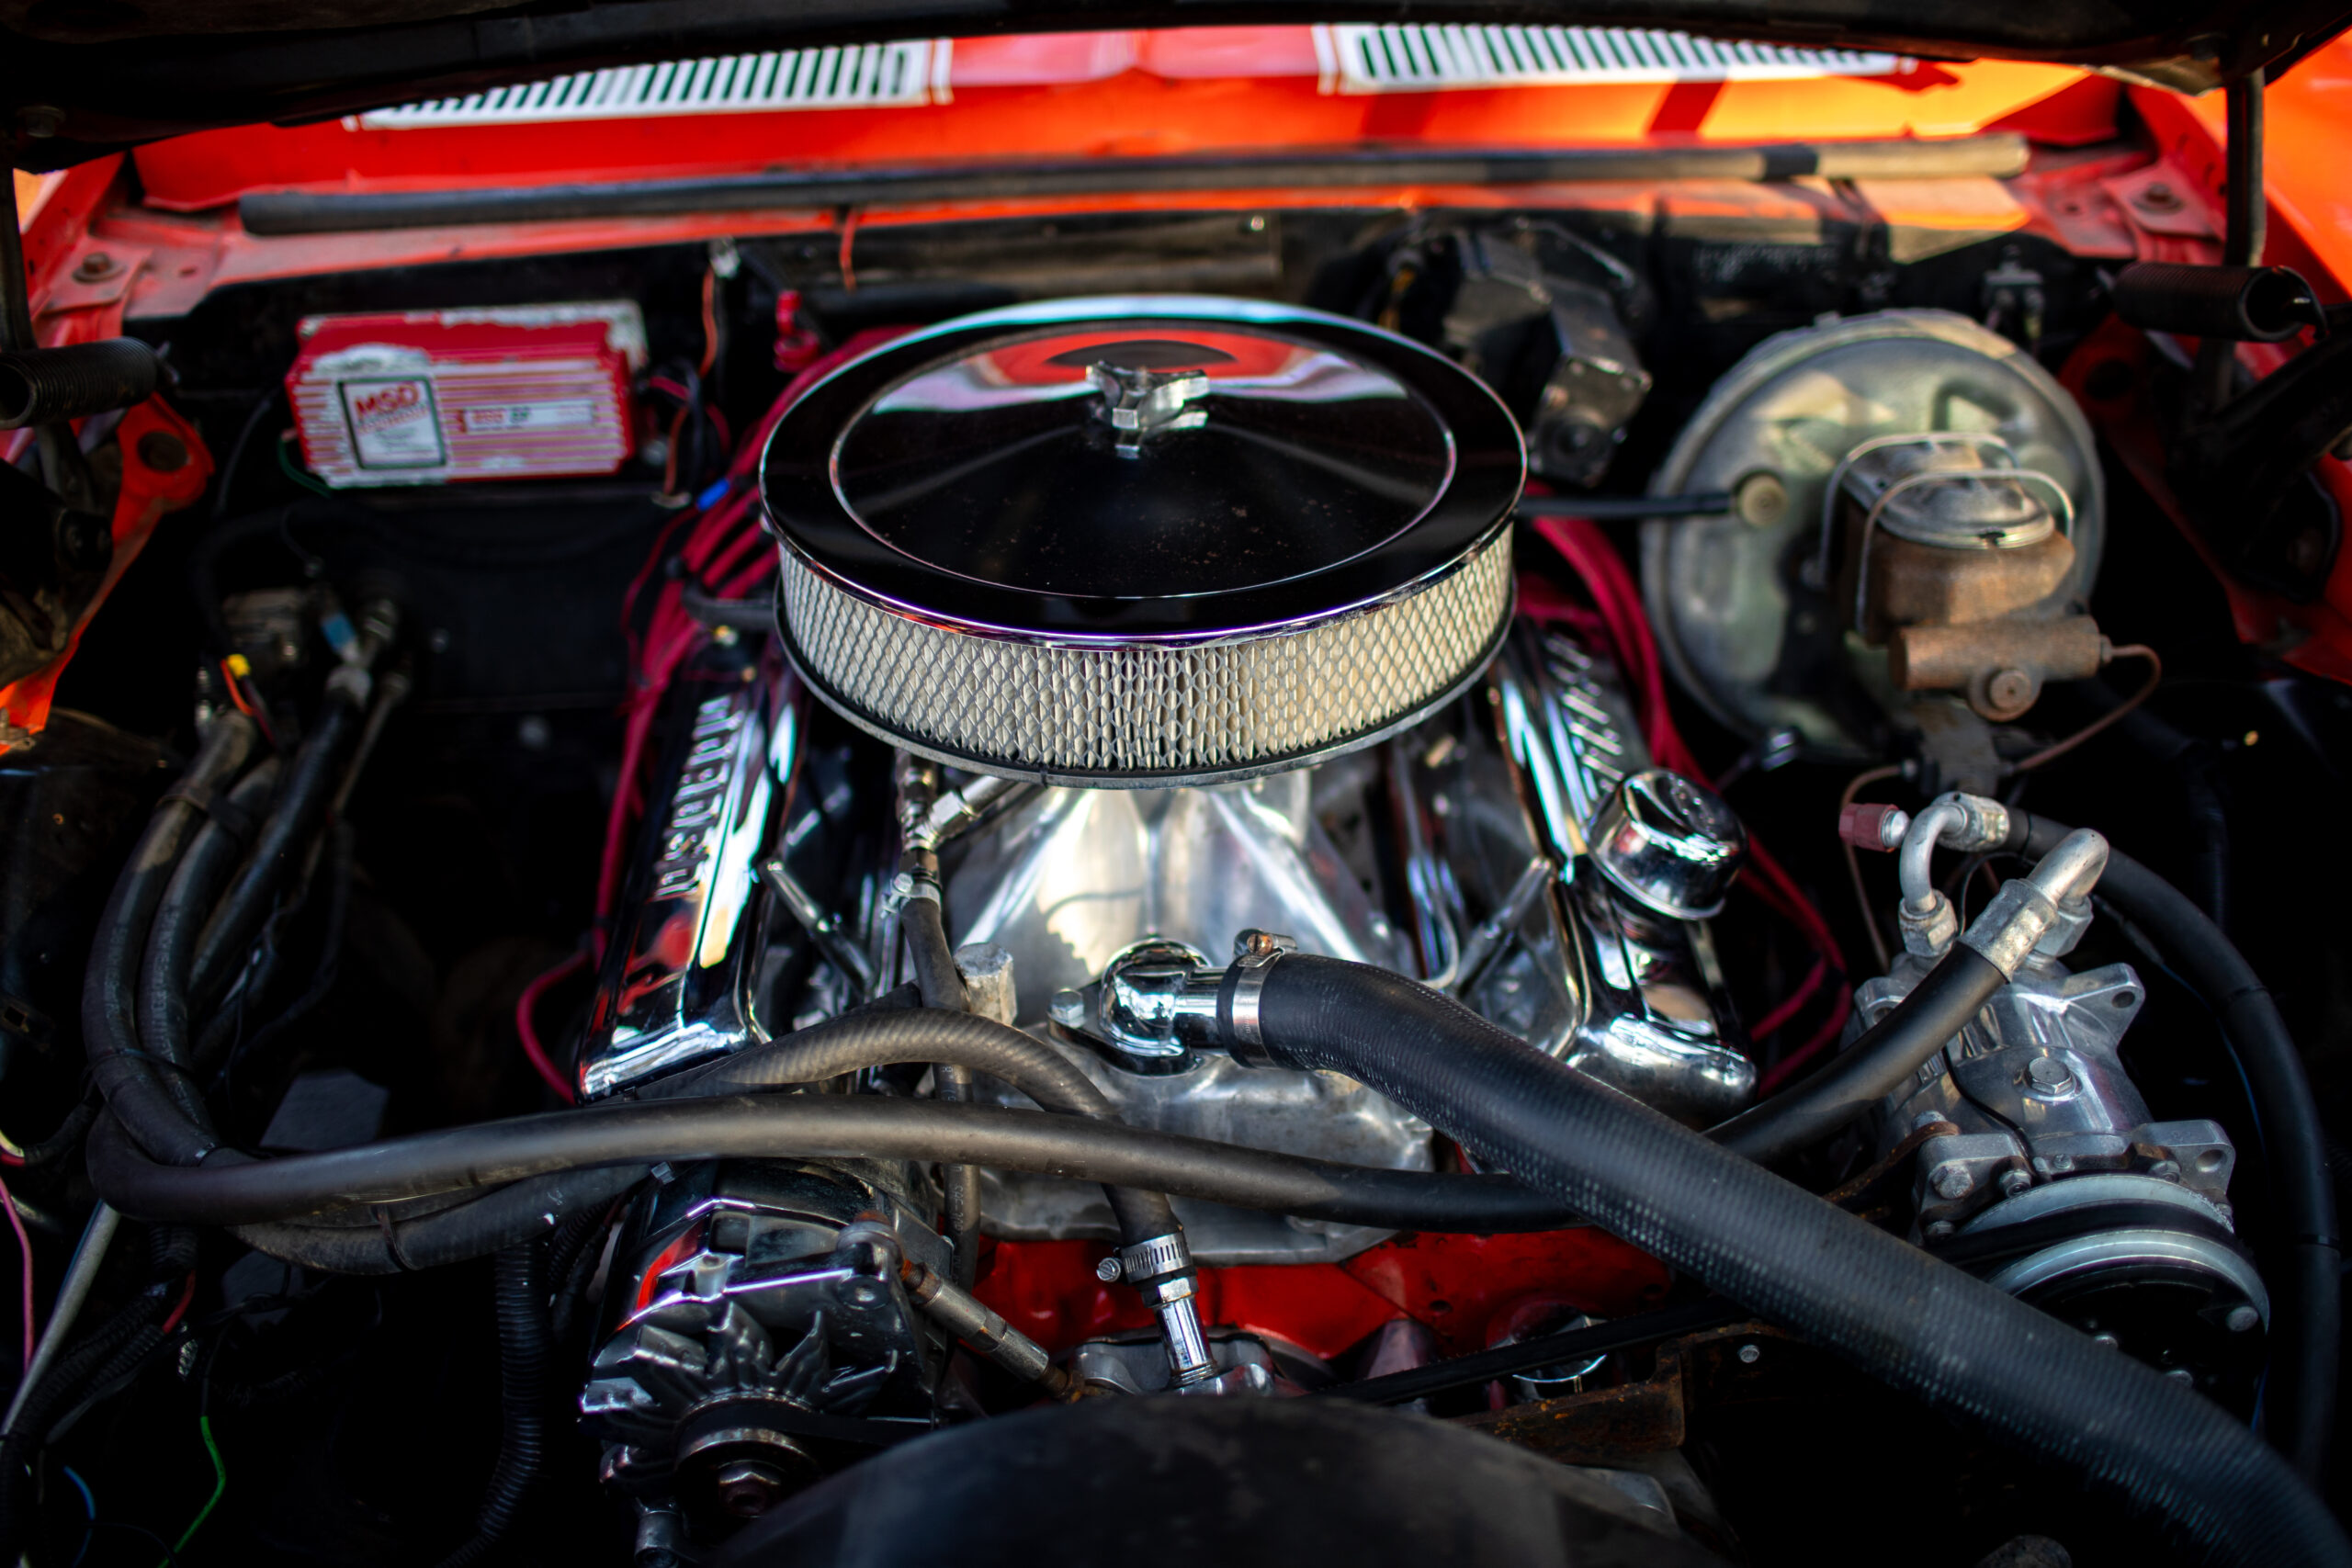 Close-up of a car engine with a chrome air filter, various hoses, and components visible.